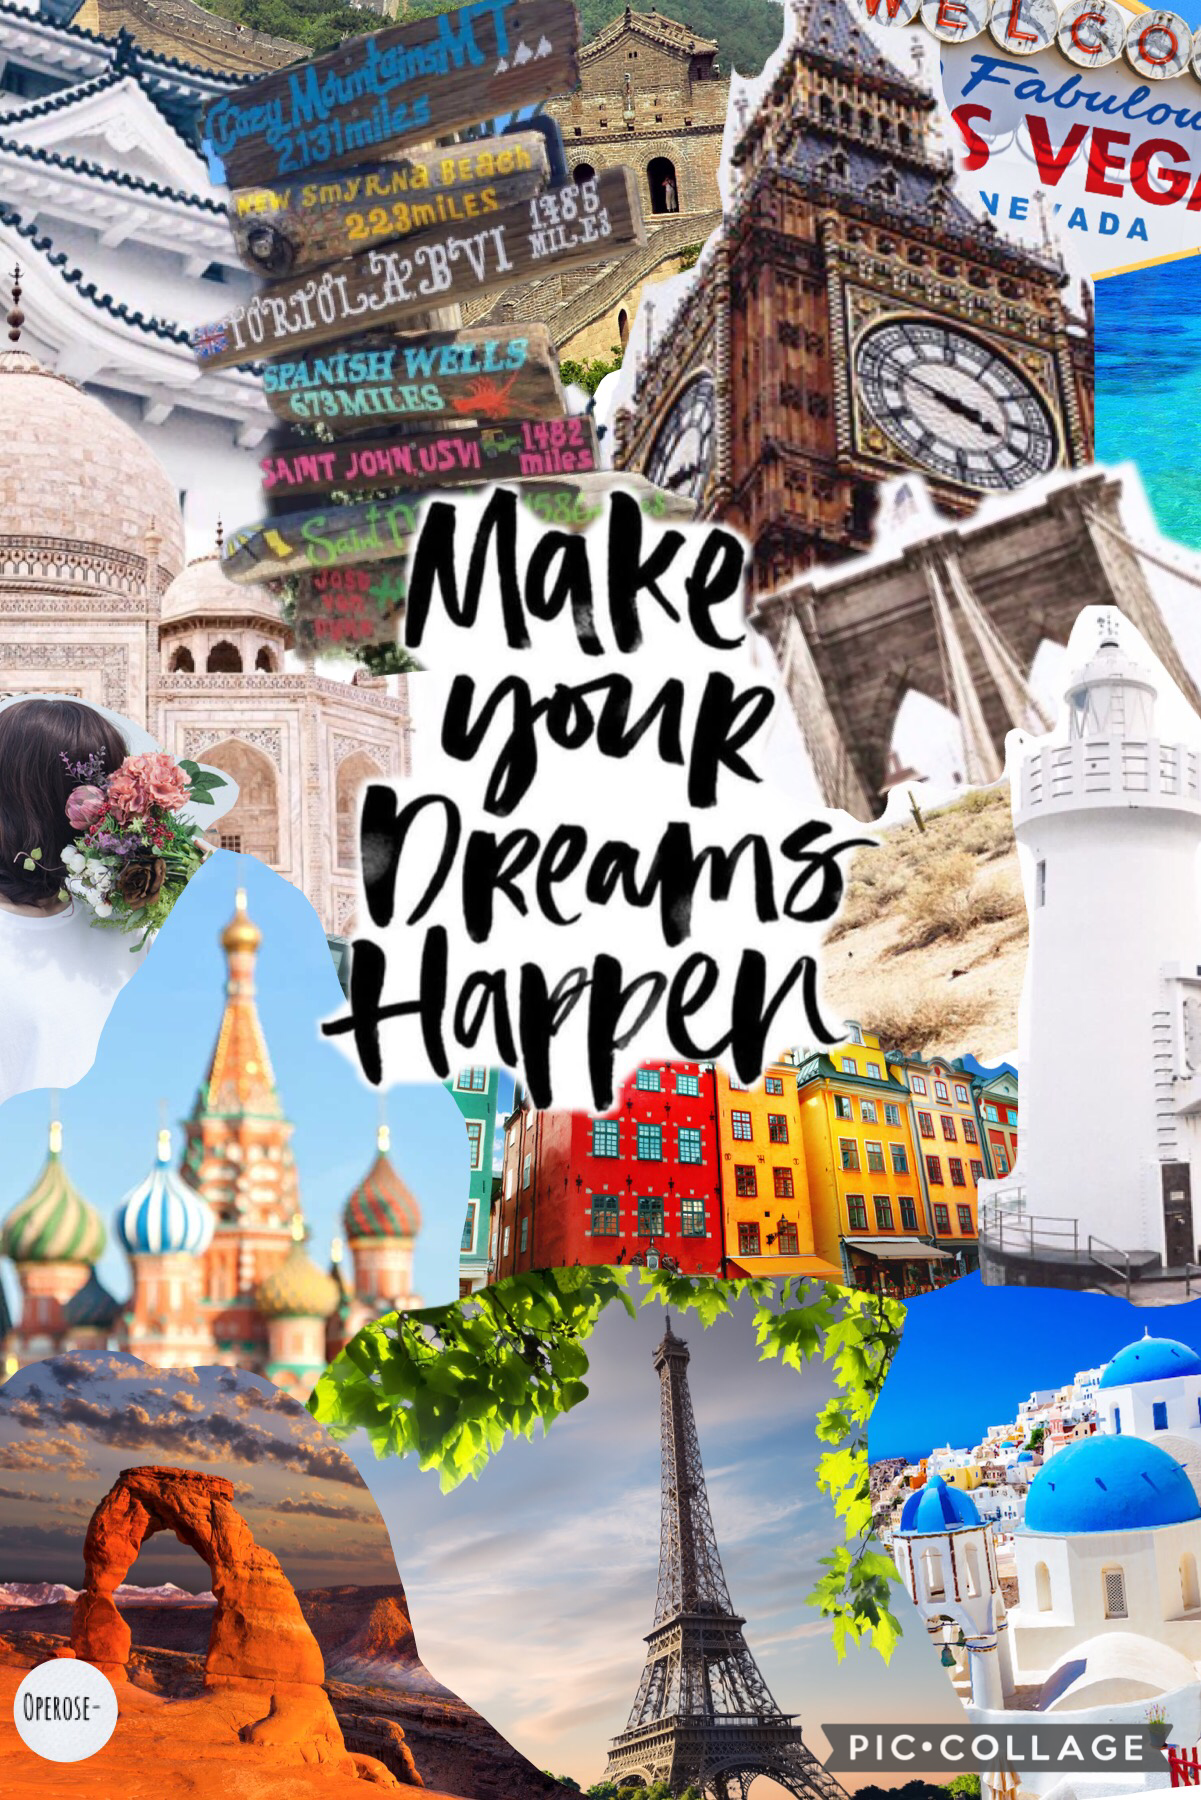 Everyone, please tap!
First of all, I’d like to say THANK YOU FOR 700!!!! And, odds are that someone will unfollow but so I know it did happen! 
Going to Disney for spring break, and really got into the kick of dream travel destinations so I made a collag